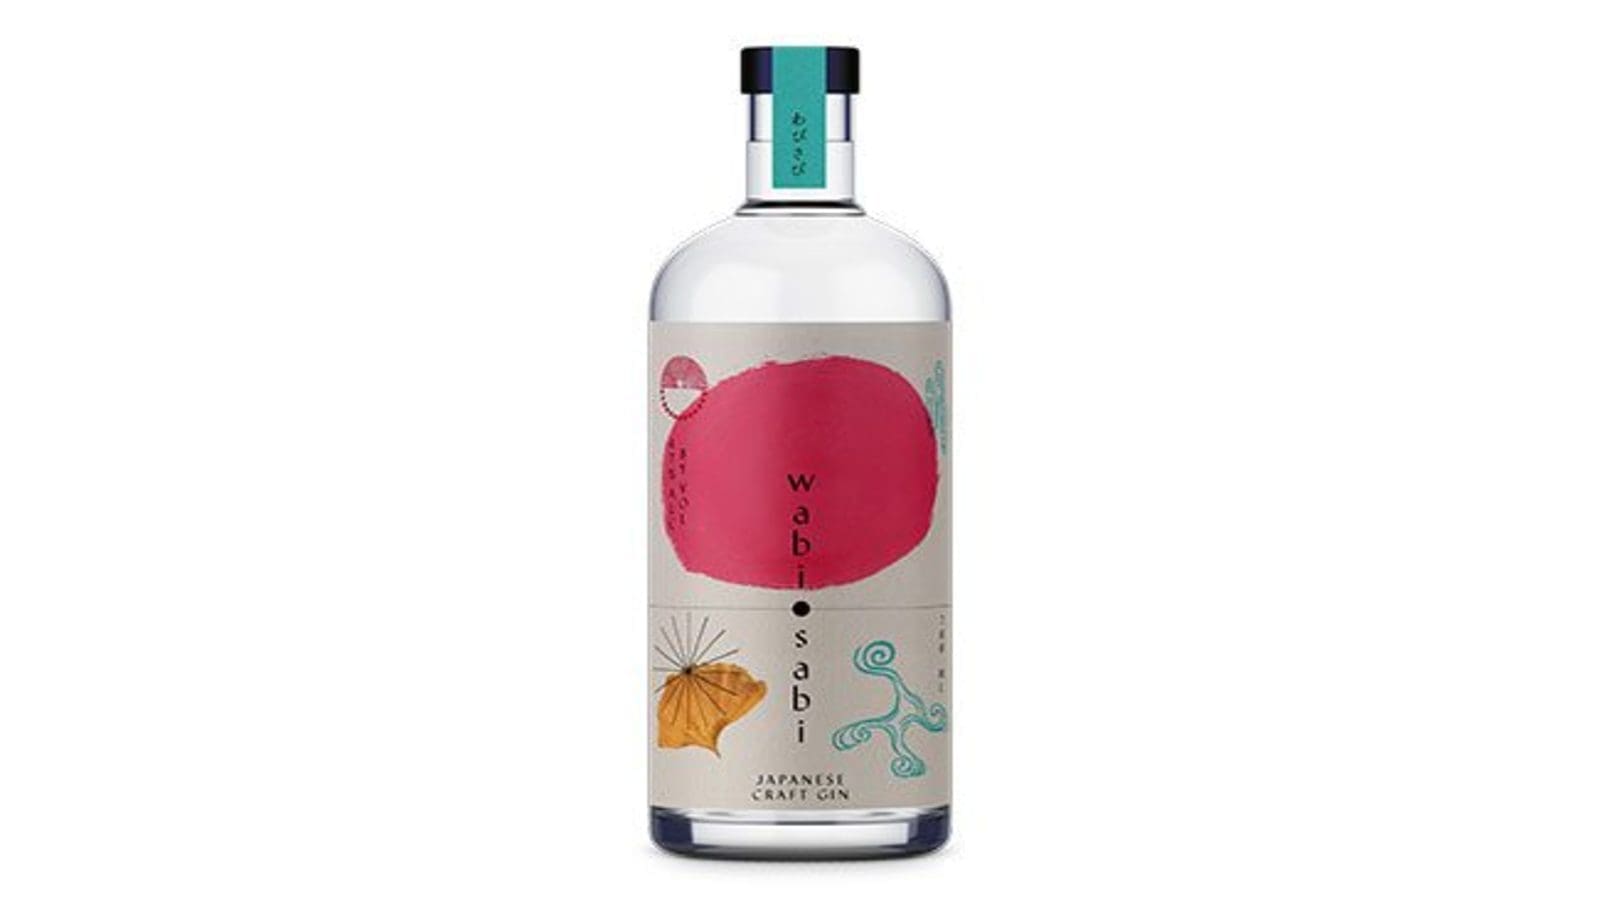 Nomu -Japan secures backing from Japanese government to expand Wabi Sabi Gin to overseas markets